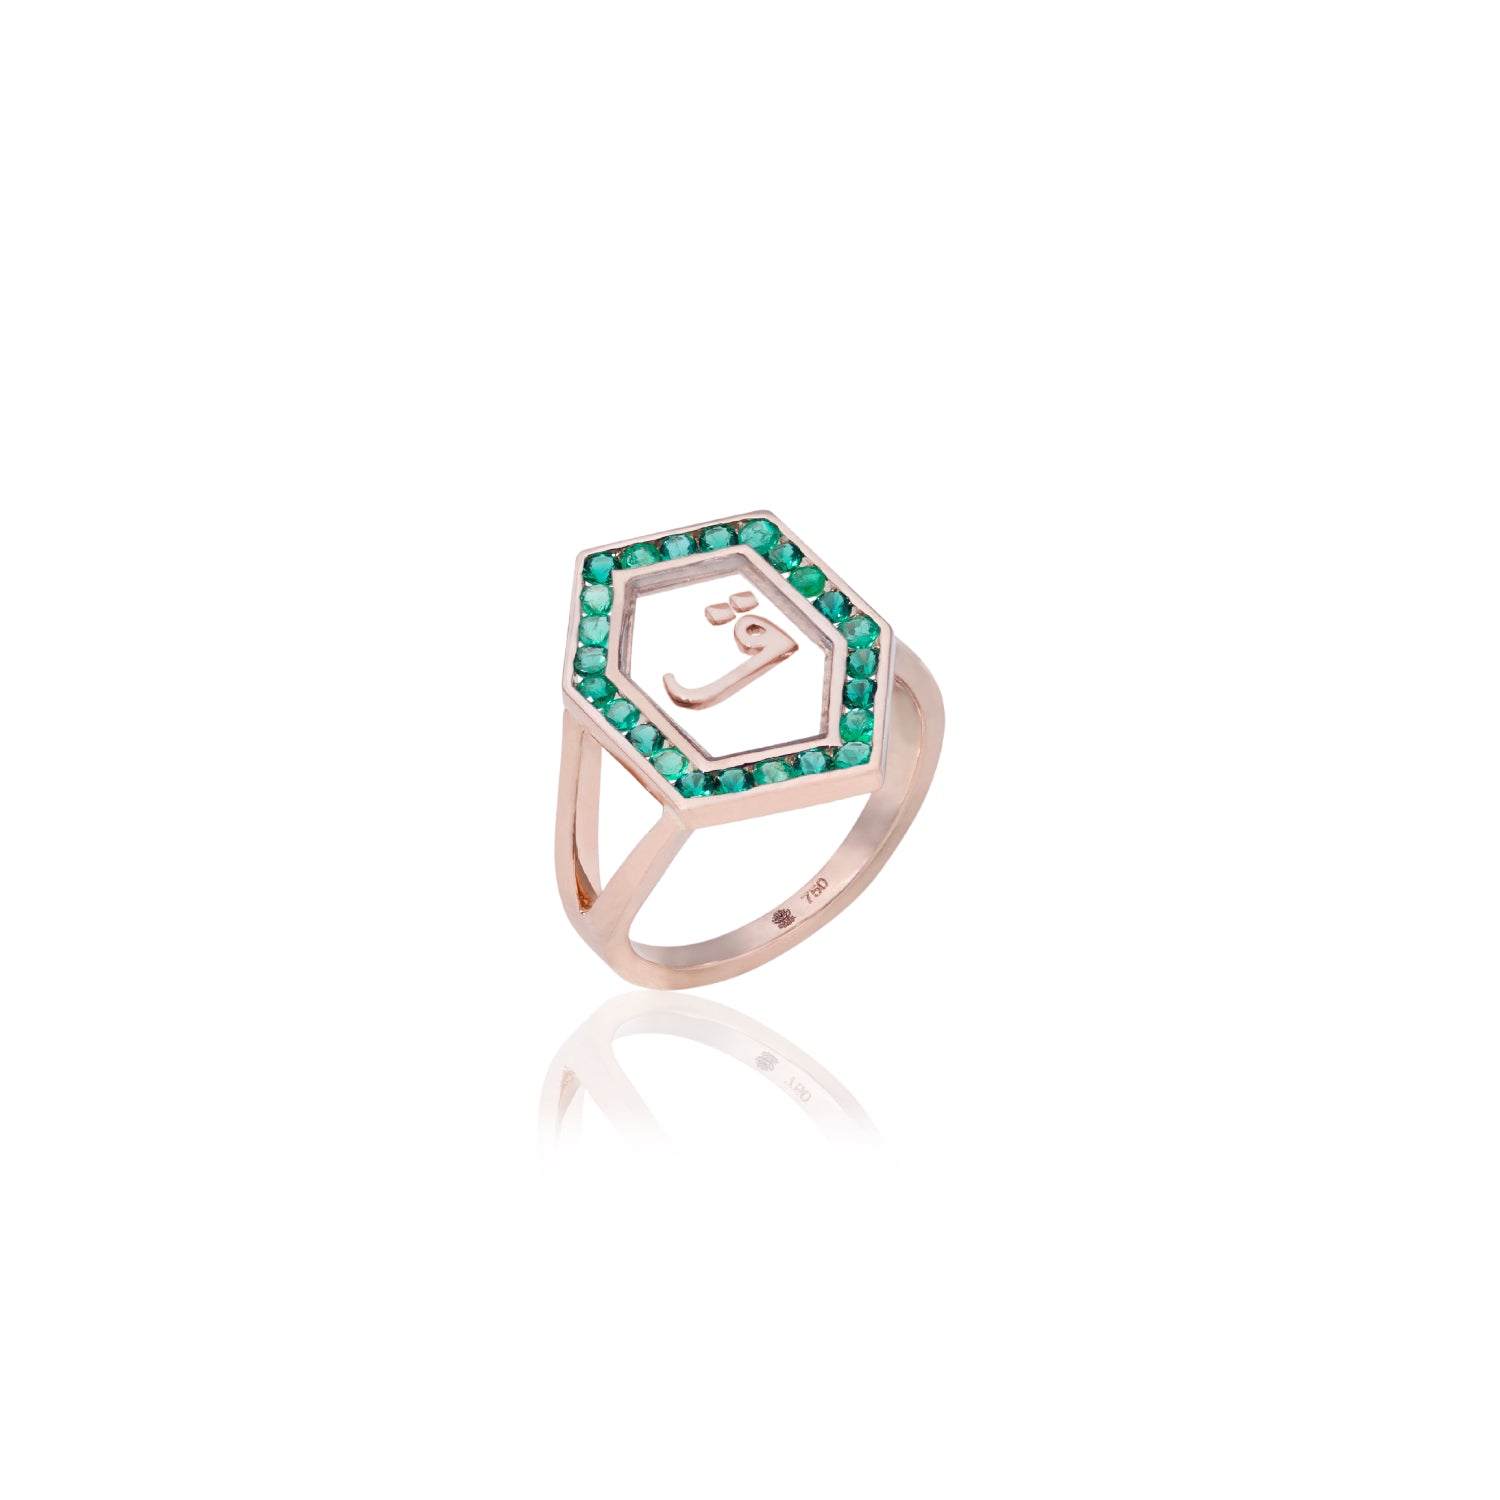 Qamoos 1.0 Letter ق Emerald Ring in Rose Gold